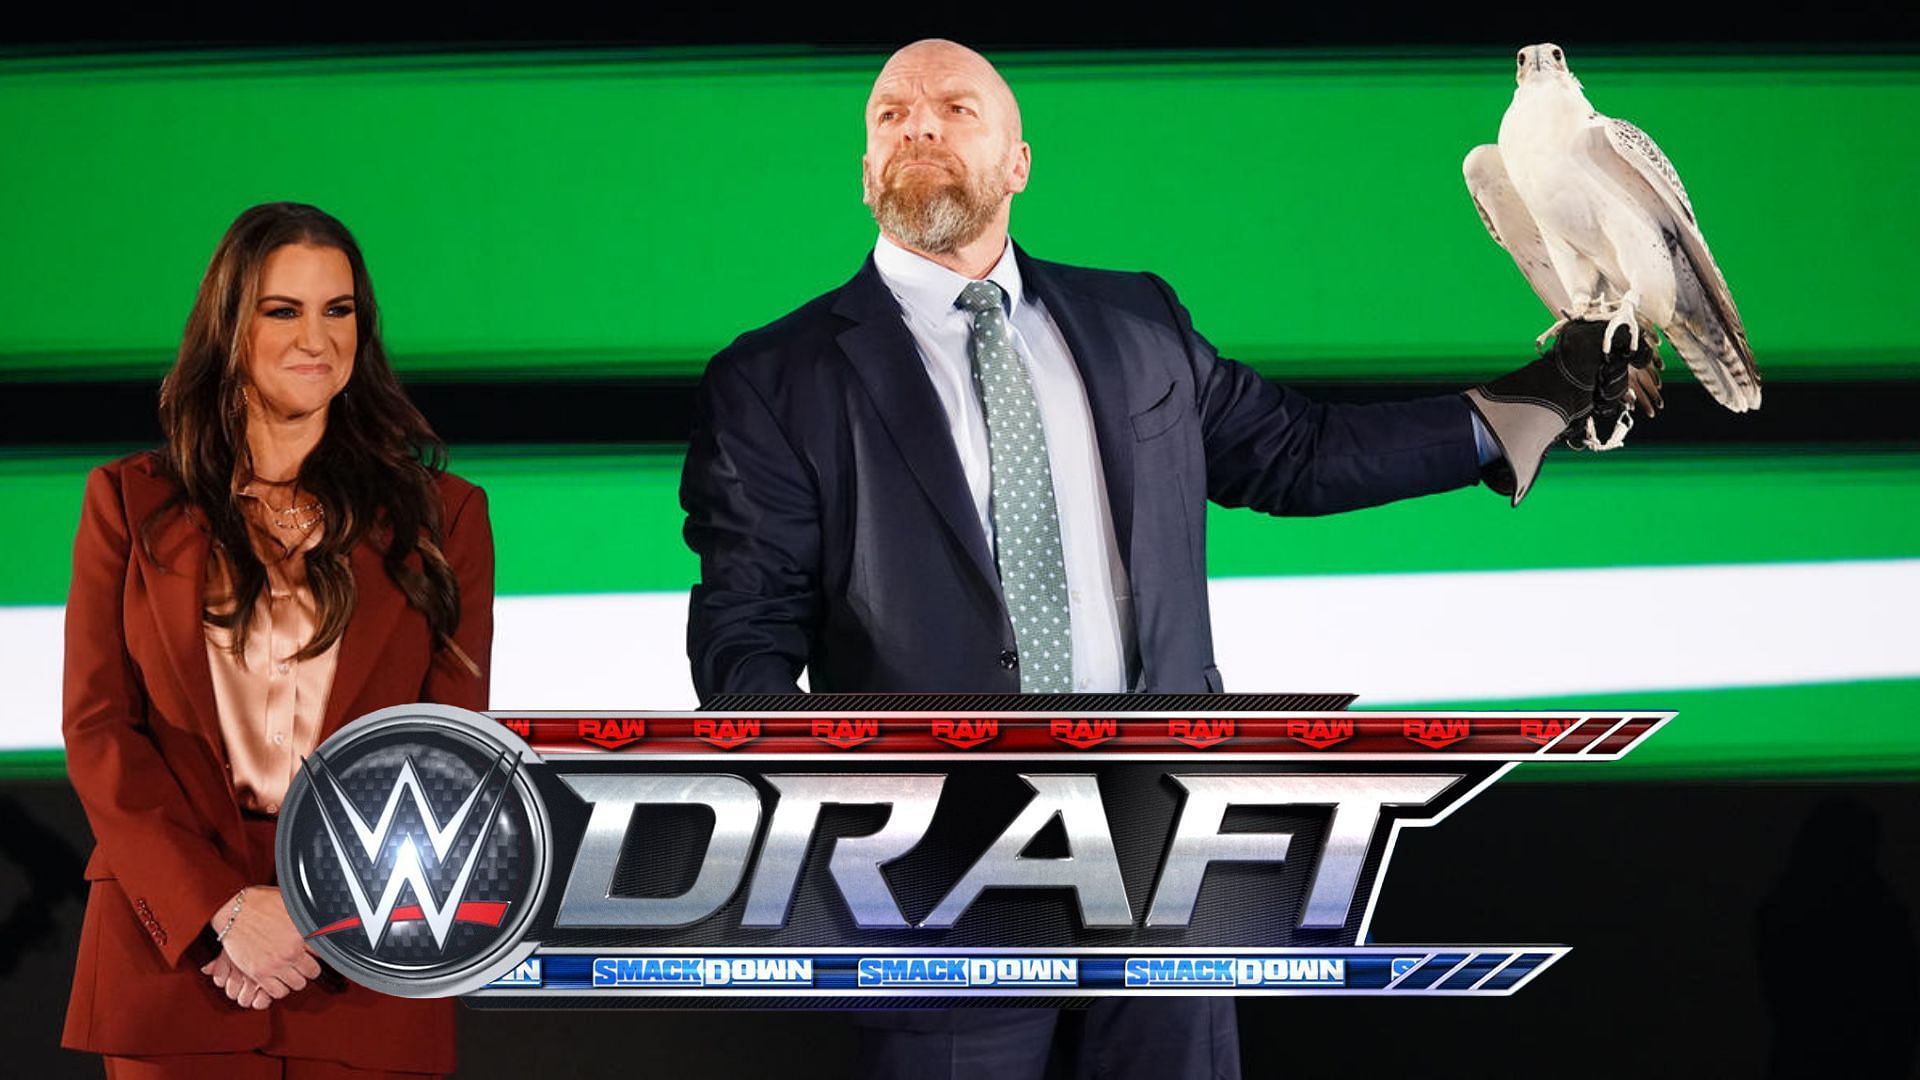 WWE is unsure of when to schedule their next superstar draft